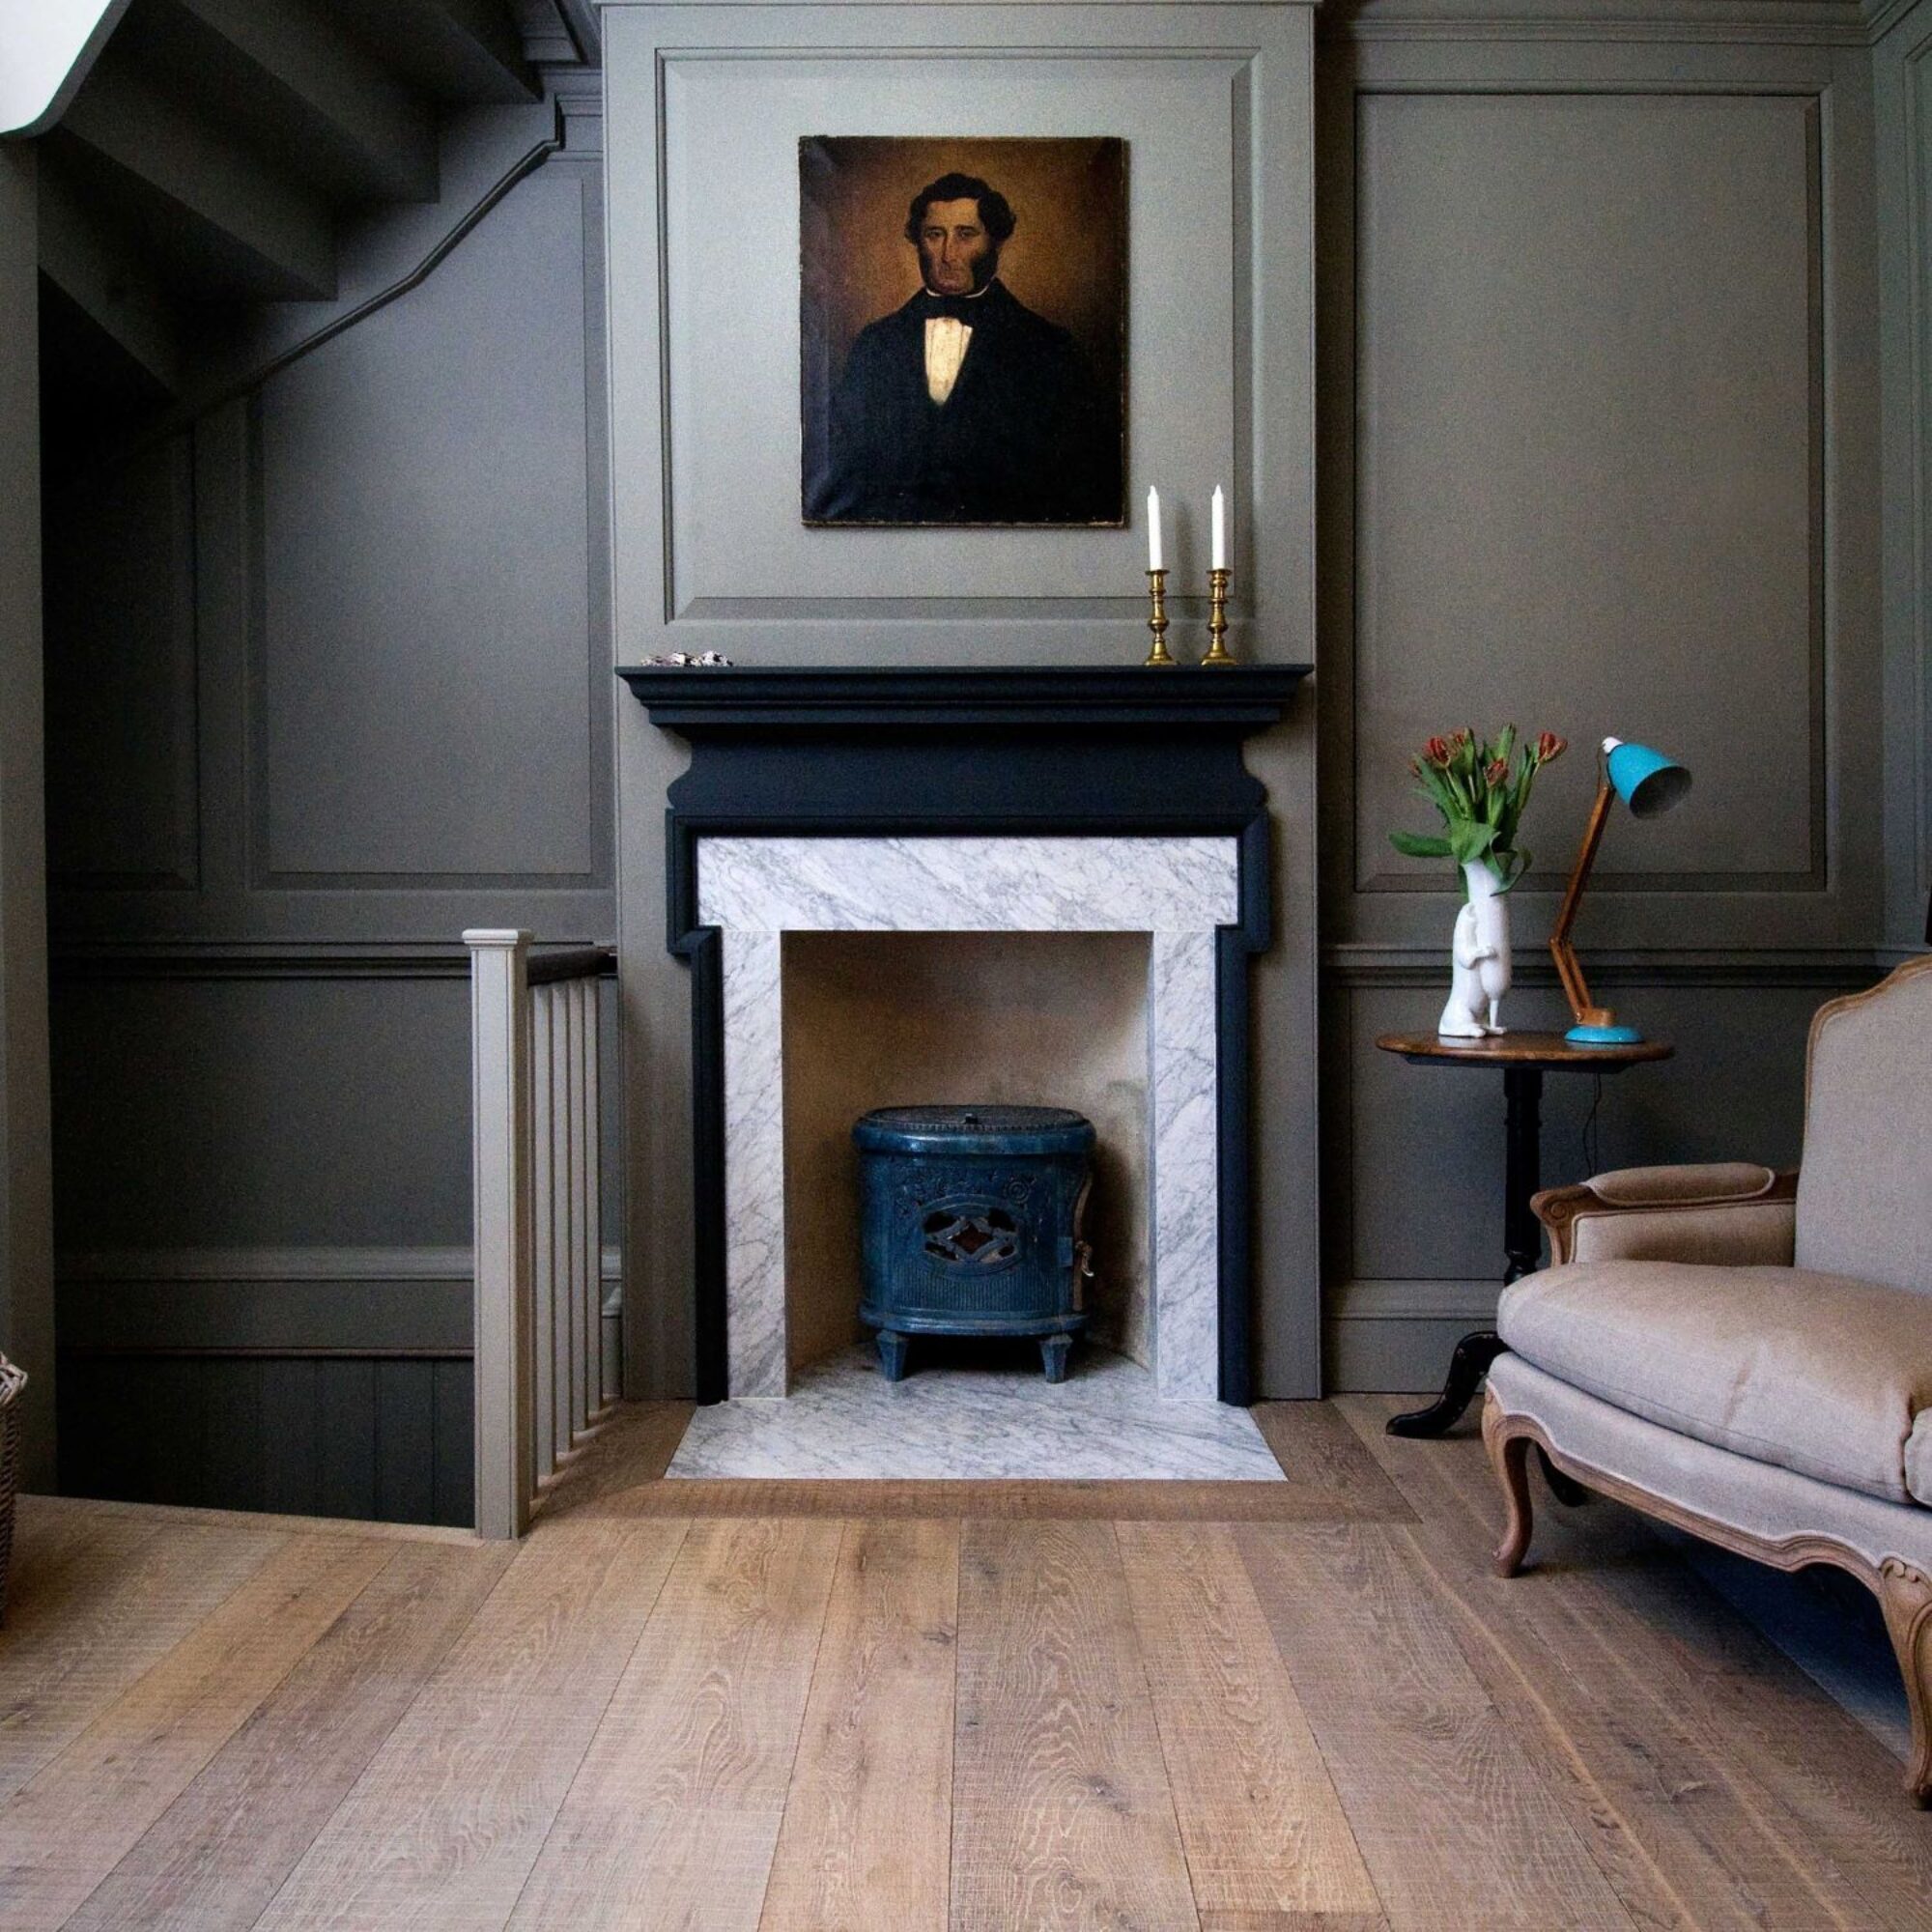 Tate bute flooring with grey panelling marble fireplace and portrait